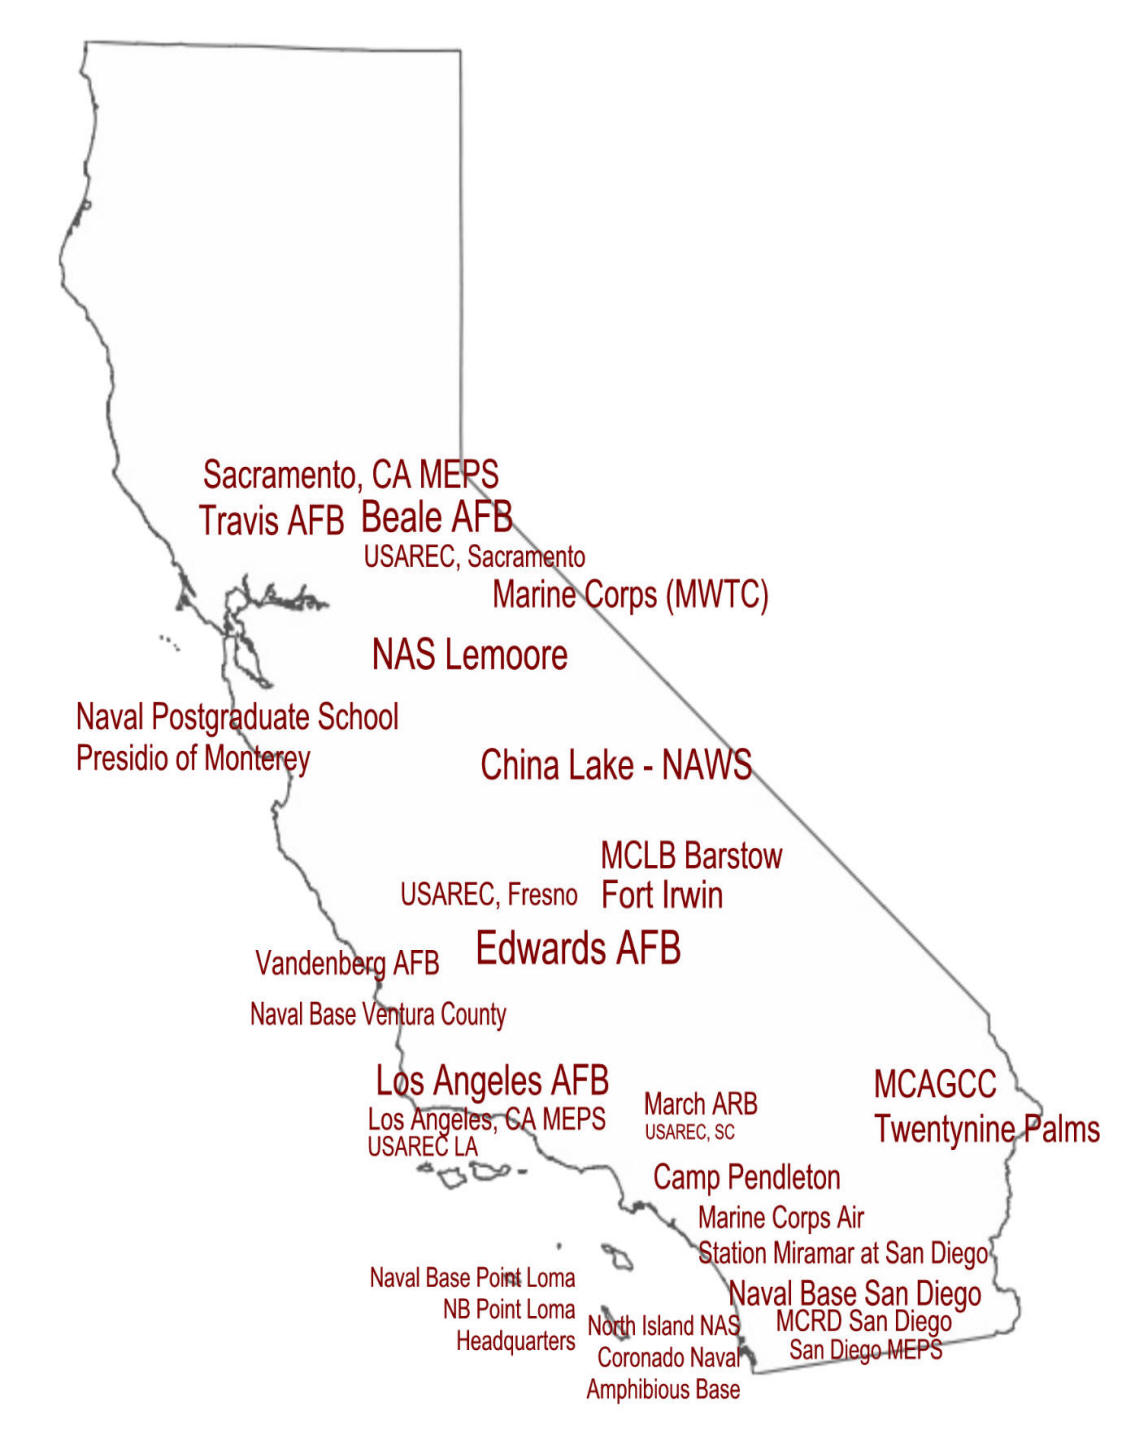 Map showing Military Bases in California with real estate agents offering Military Relocation Services